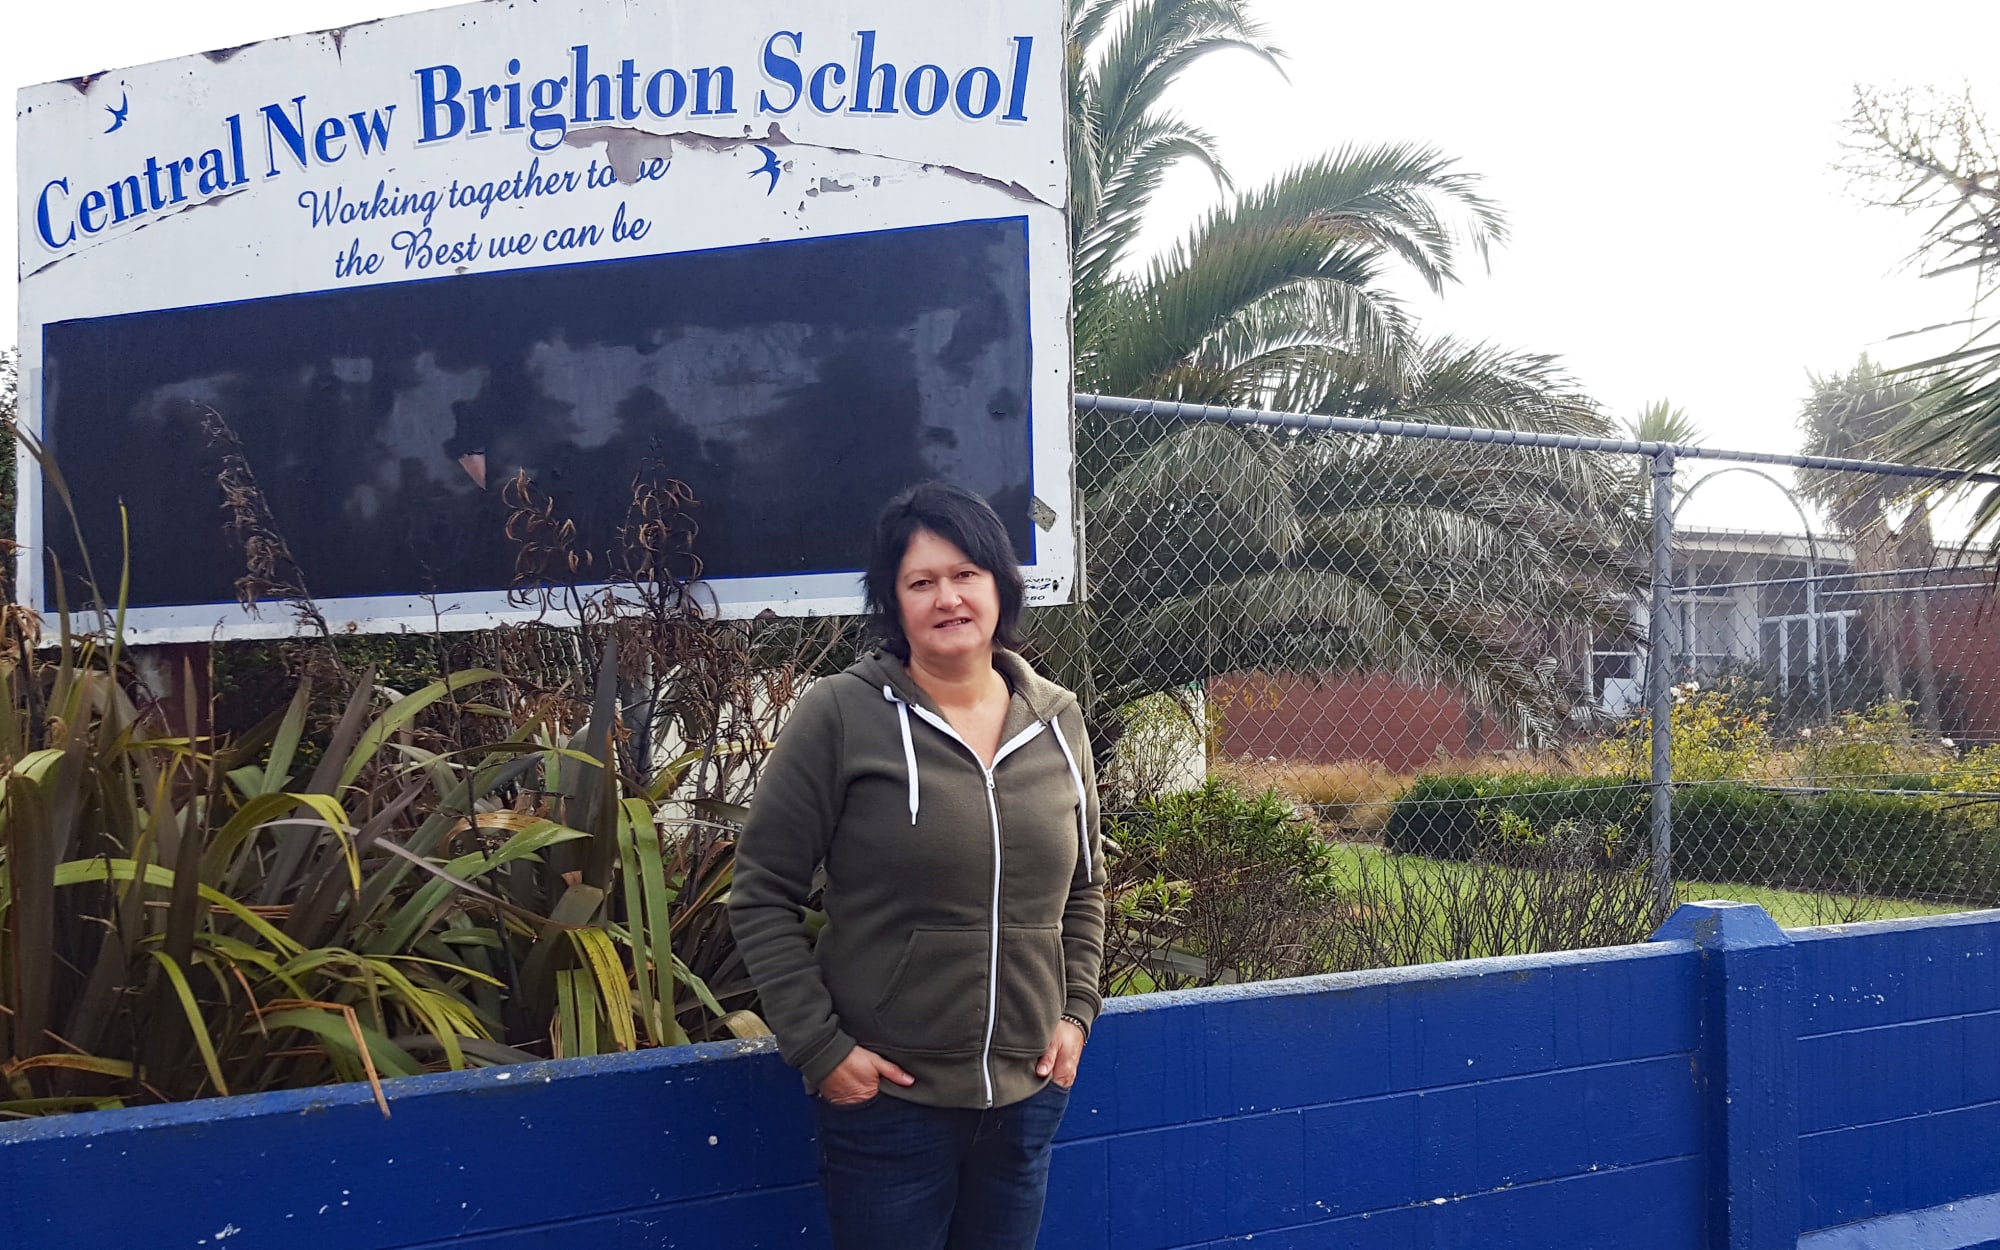 Liarne Tamaiparea had the difficult job of being board chair when her old school, Central New Brighton, was closed at the end of 2014